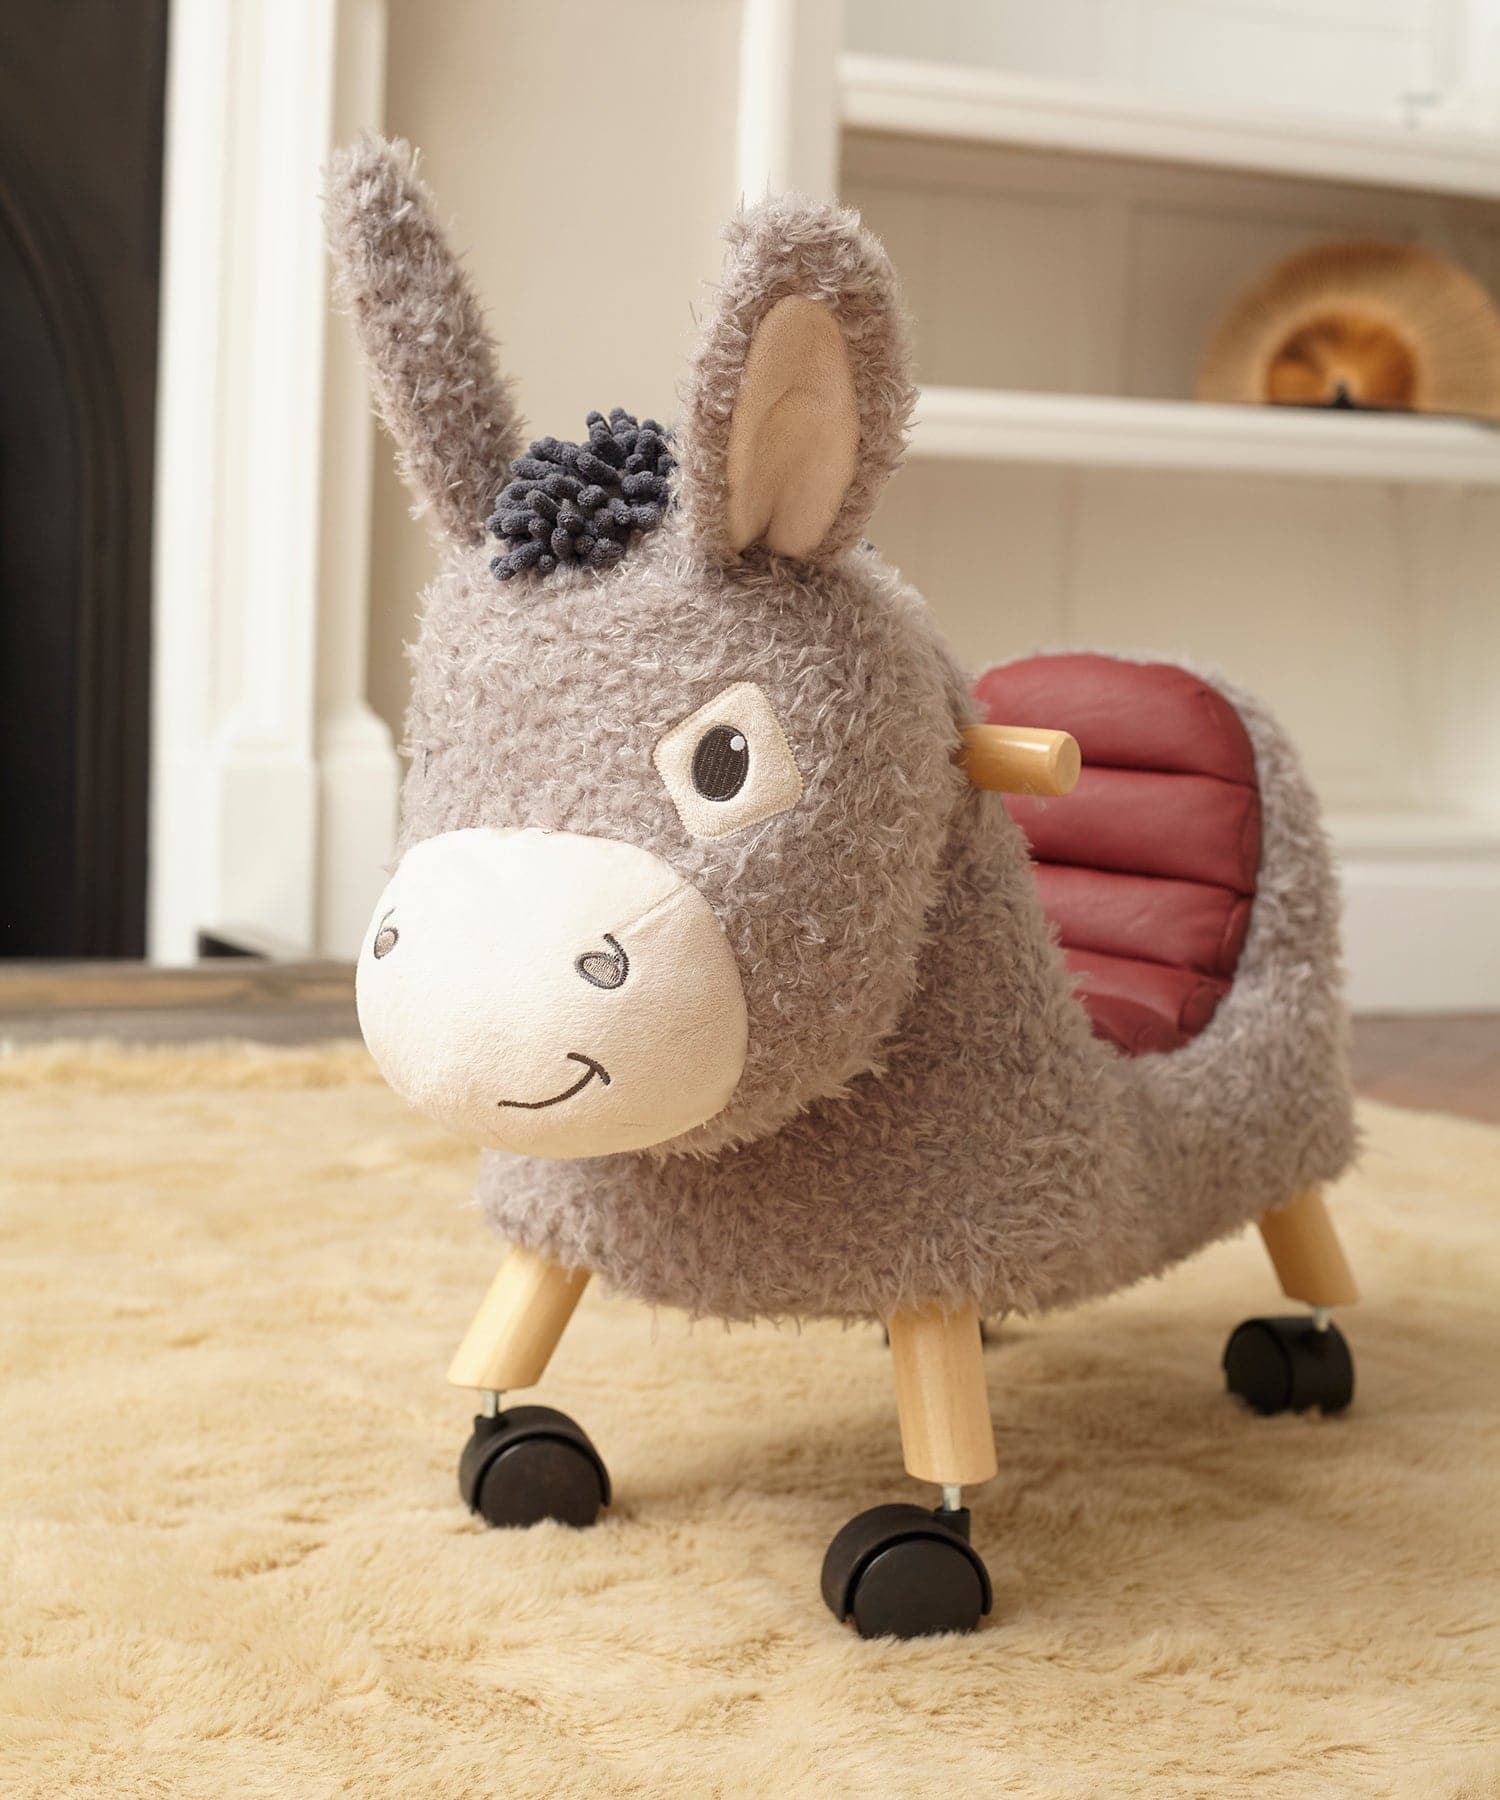 Little Bird Told Me Bojangles Donkey Ride On - For Your Little One